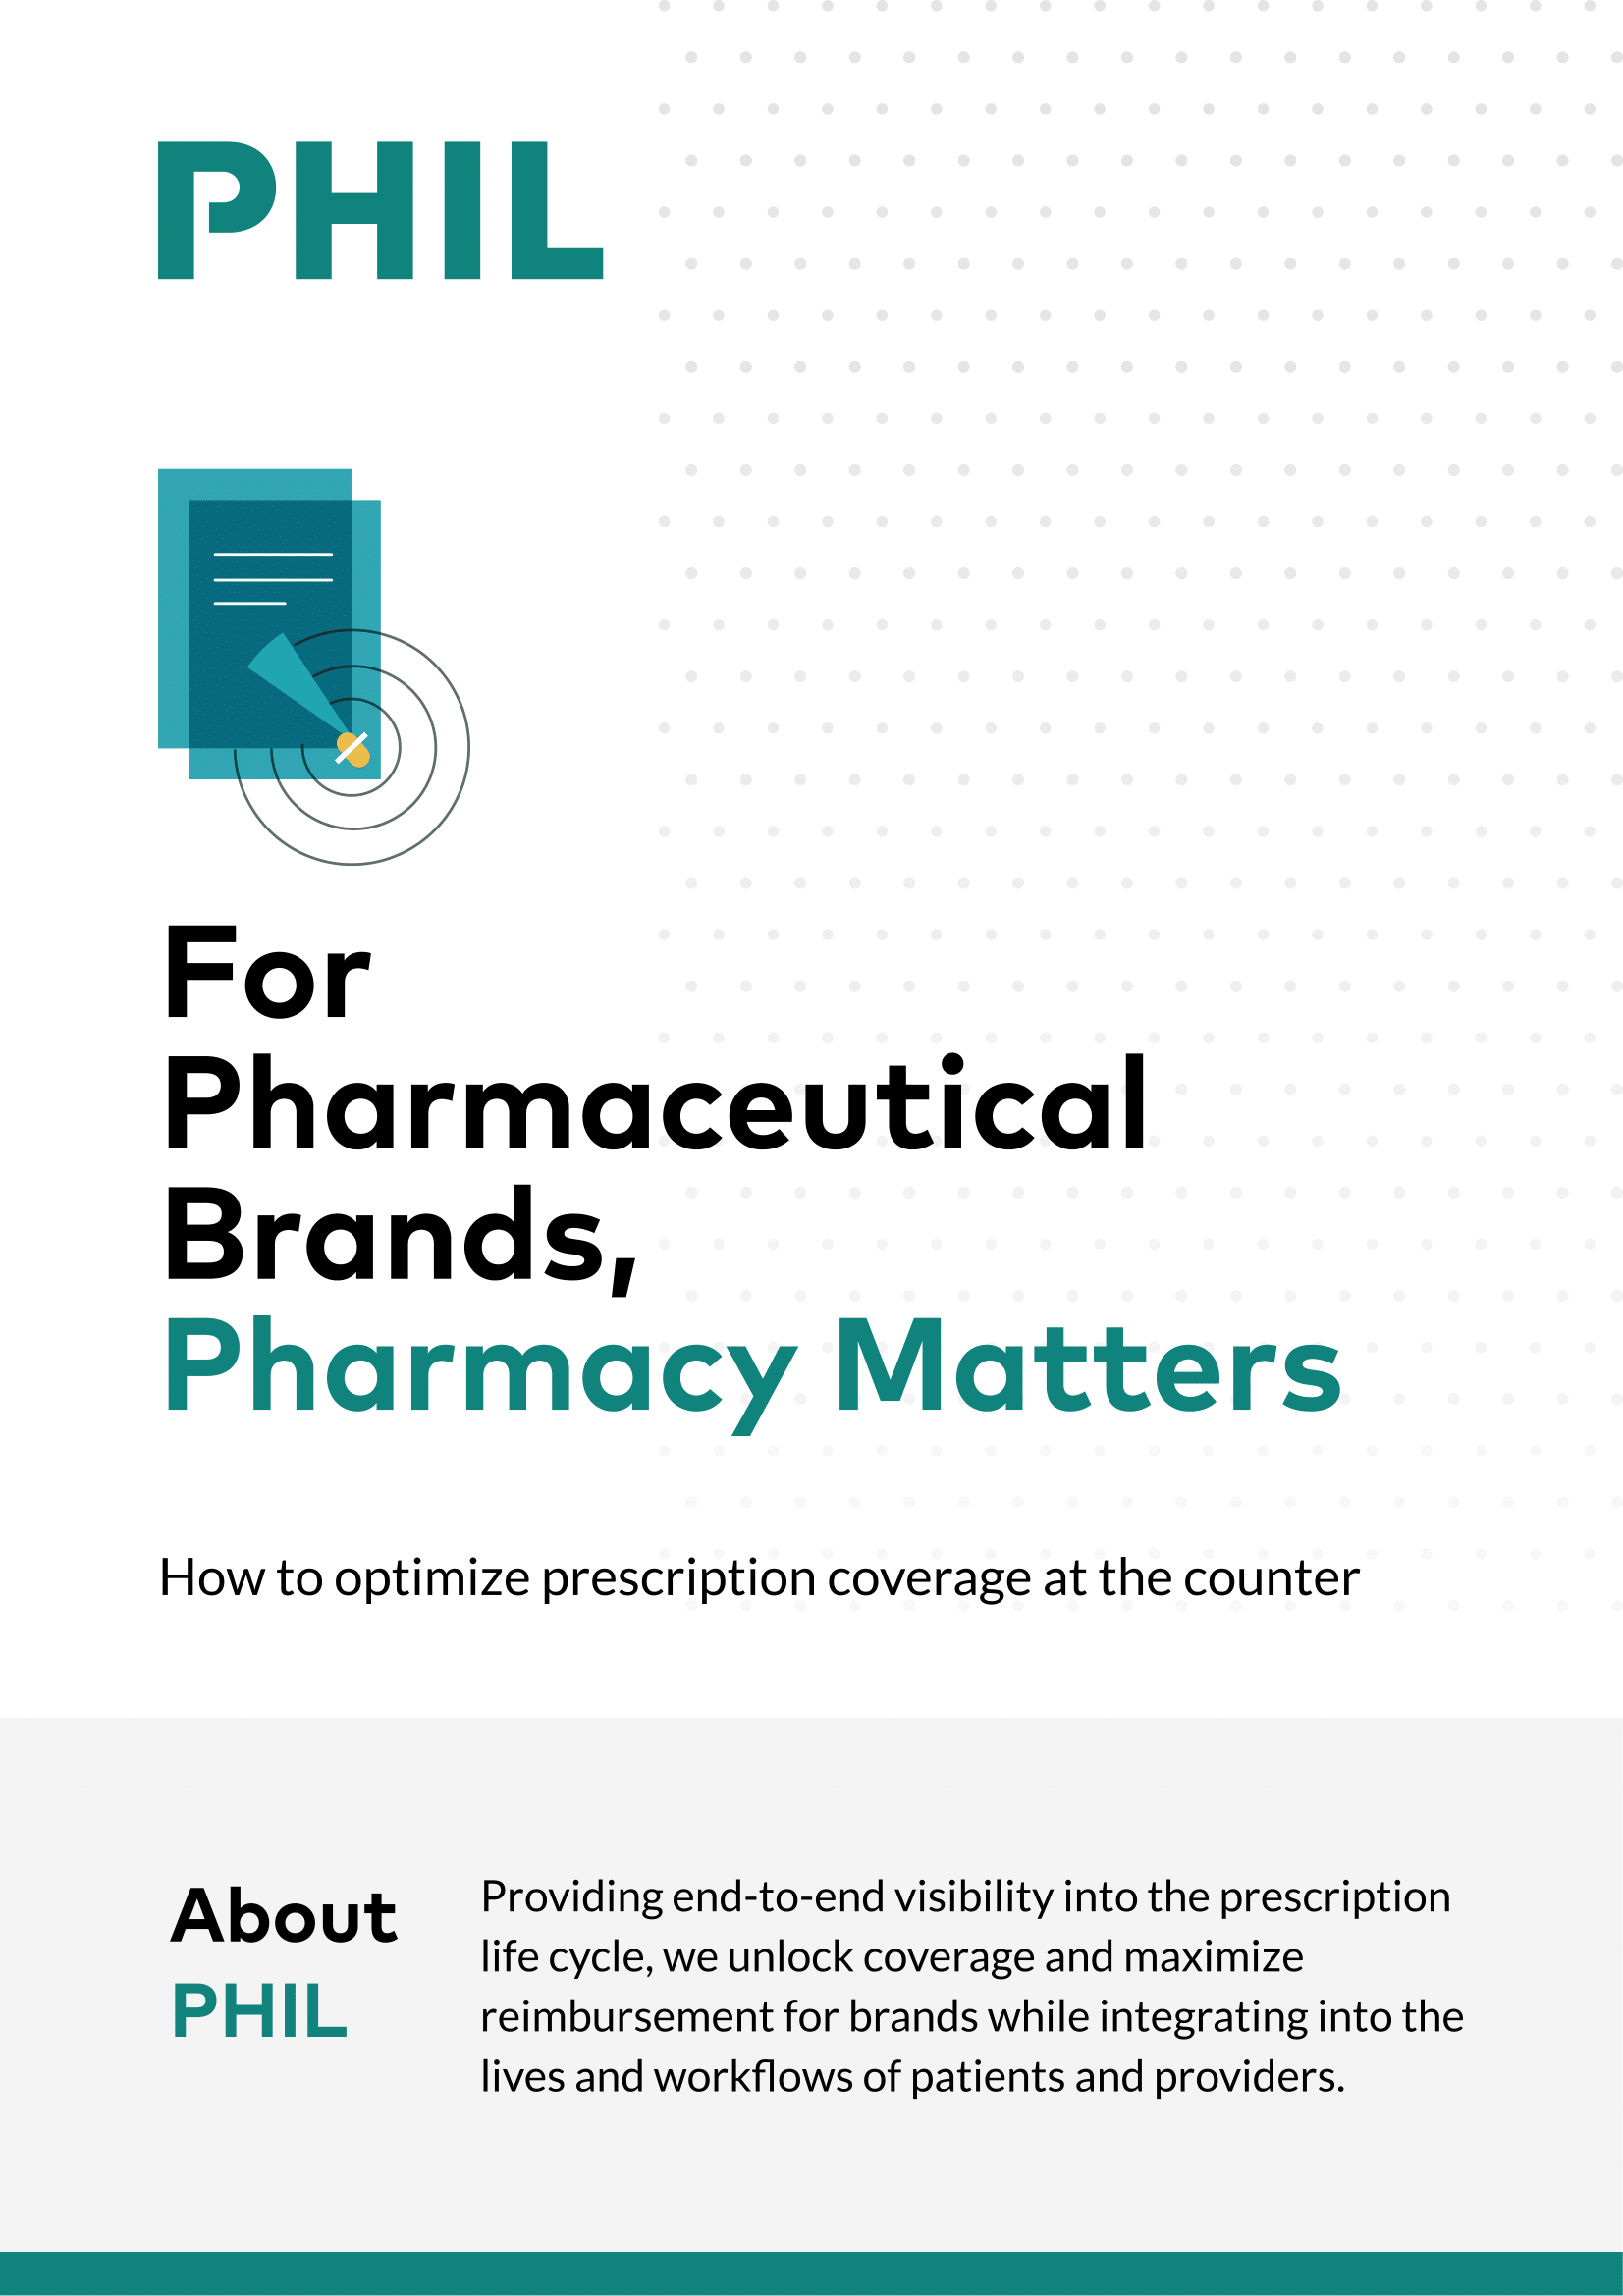 PHIL_Inc_-_Why_the_Pharmacy_Matters_White_Paper_-_December_2022-01